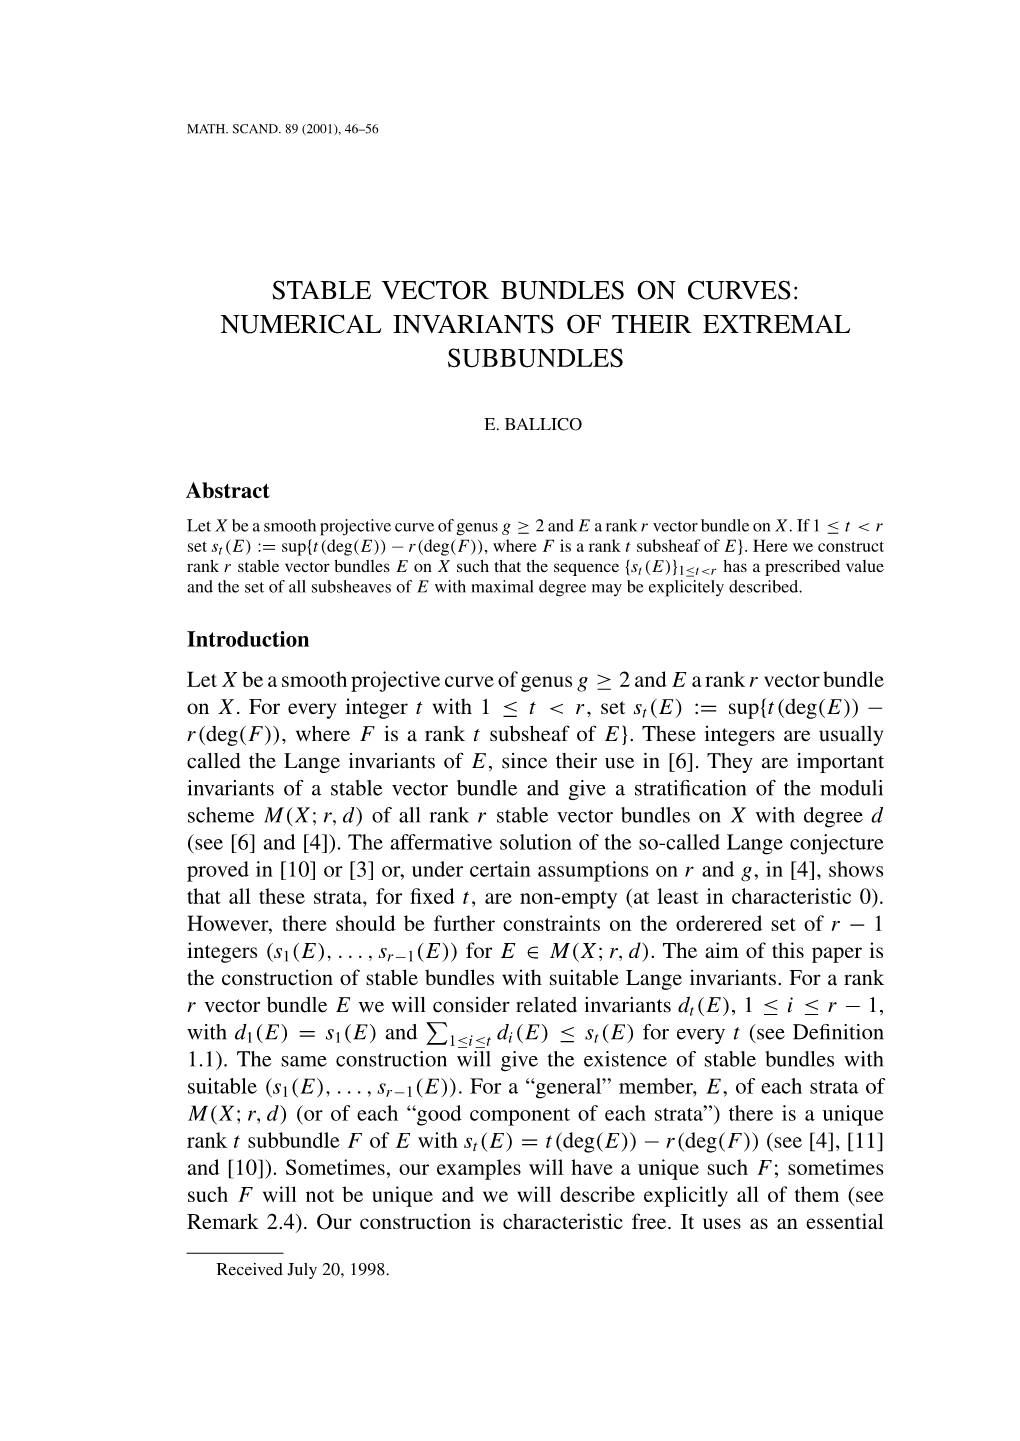 Stable Vector Bundles on Curves: Numerical Invariants of Their Extremal Subbundles